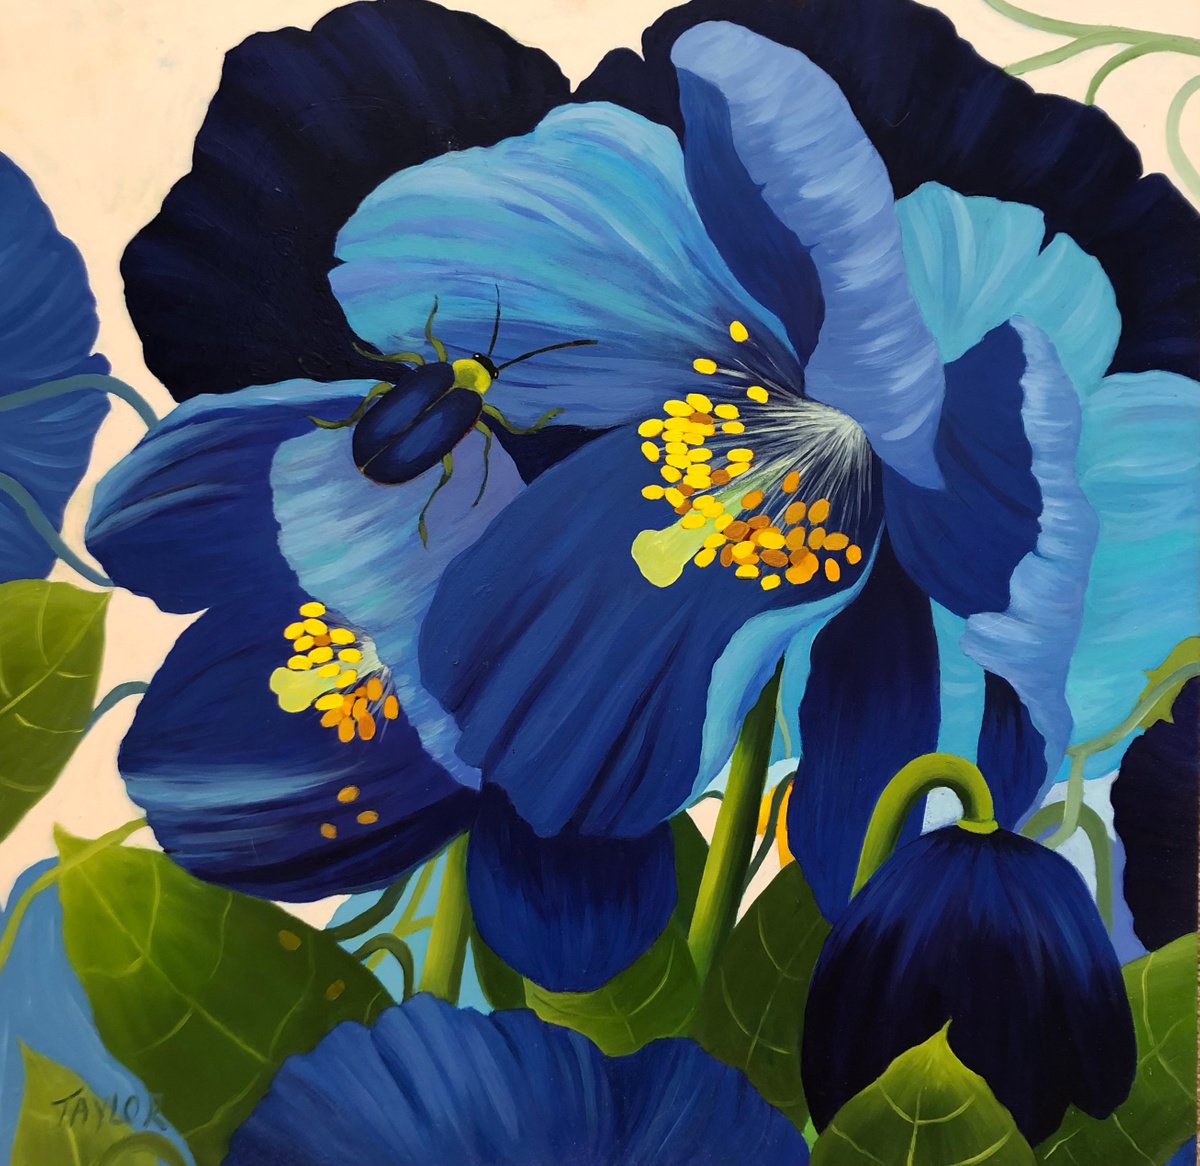 ’Blue Poppies’ by Fiona Taylor